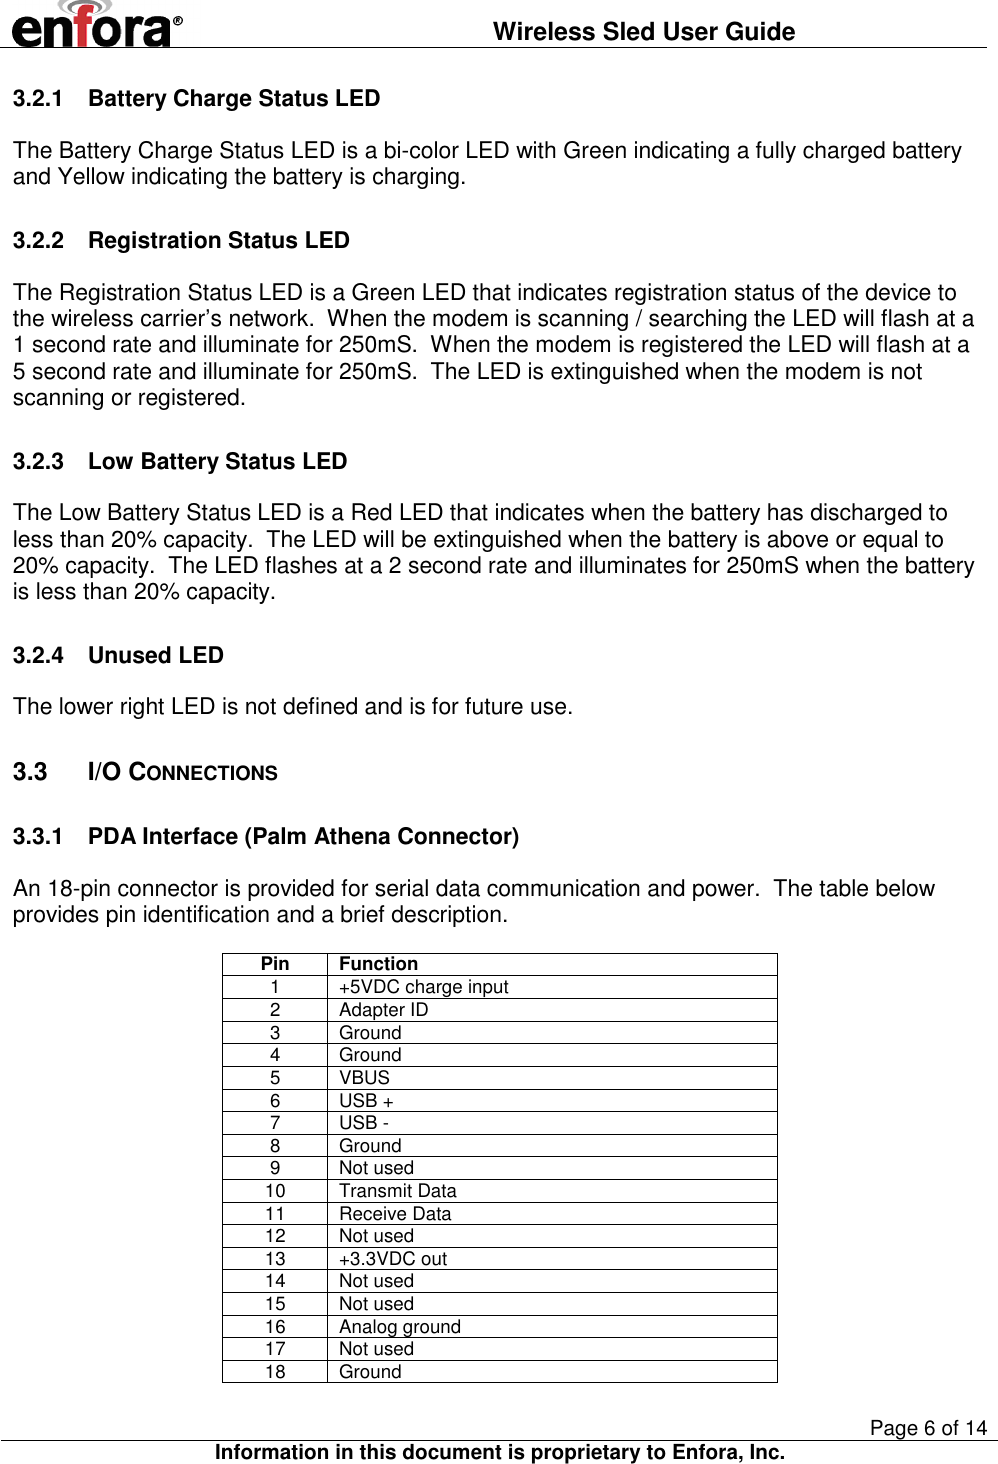  Wireless Sled User Guide       Page 6 of 14 Information in this document is proprietary to Enfora, Inc.  3.2.1  Battery Charge Status LED The Battery Charge Status LED is a bi-color LED with Green indicating a fully charged battery and Yellow indicating the battery is charging.   3.2.2  Registration Status LED The Registration Status LED is a Green LED that indicates registration status of the device to the wireless carrier’s network.  When the modem is scanning / searching the LED will flash at a 1 second rate and illuminate for 250mS.  When the modem is registered the LED will flash at a 5 second rate and illuminate for 250mS.  The LED is extinguished when the modem is not scanning or registered. 3.2.3  Low Battery Status LED The Low Battery Status LED is a Red LED that indicates when the battery has discharged to less than 20% capacity.  The LED will be extinguished when the battery is above or equal to 20% capacity.  The LED flashes at a 2 second rate and illuminates for 250mS when the battery is less than 20% capacity. 3.2.4  Unused LED The lower right LED is not defined and is for future use.  3.3  I/O CONNECTIONS 3.3.1  PDA Interface (Palm Athena Connector) An 18-pin connector is provided for serial data communication and power.  The table below provides pin identification and a brief description. Pin  Function 1  +5VDC charge input 2  Adapter ID 3  Ground 4  Ground 5  VBUS 6  USB + 7  USB - 8  Ground 9  Not used 10  Transmit Data 11  Receive Data 12  Not used 13  +3.3VDC out 14  Not used 15  Not used 16  Analog ground 17  Not used 18  Ground 